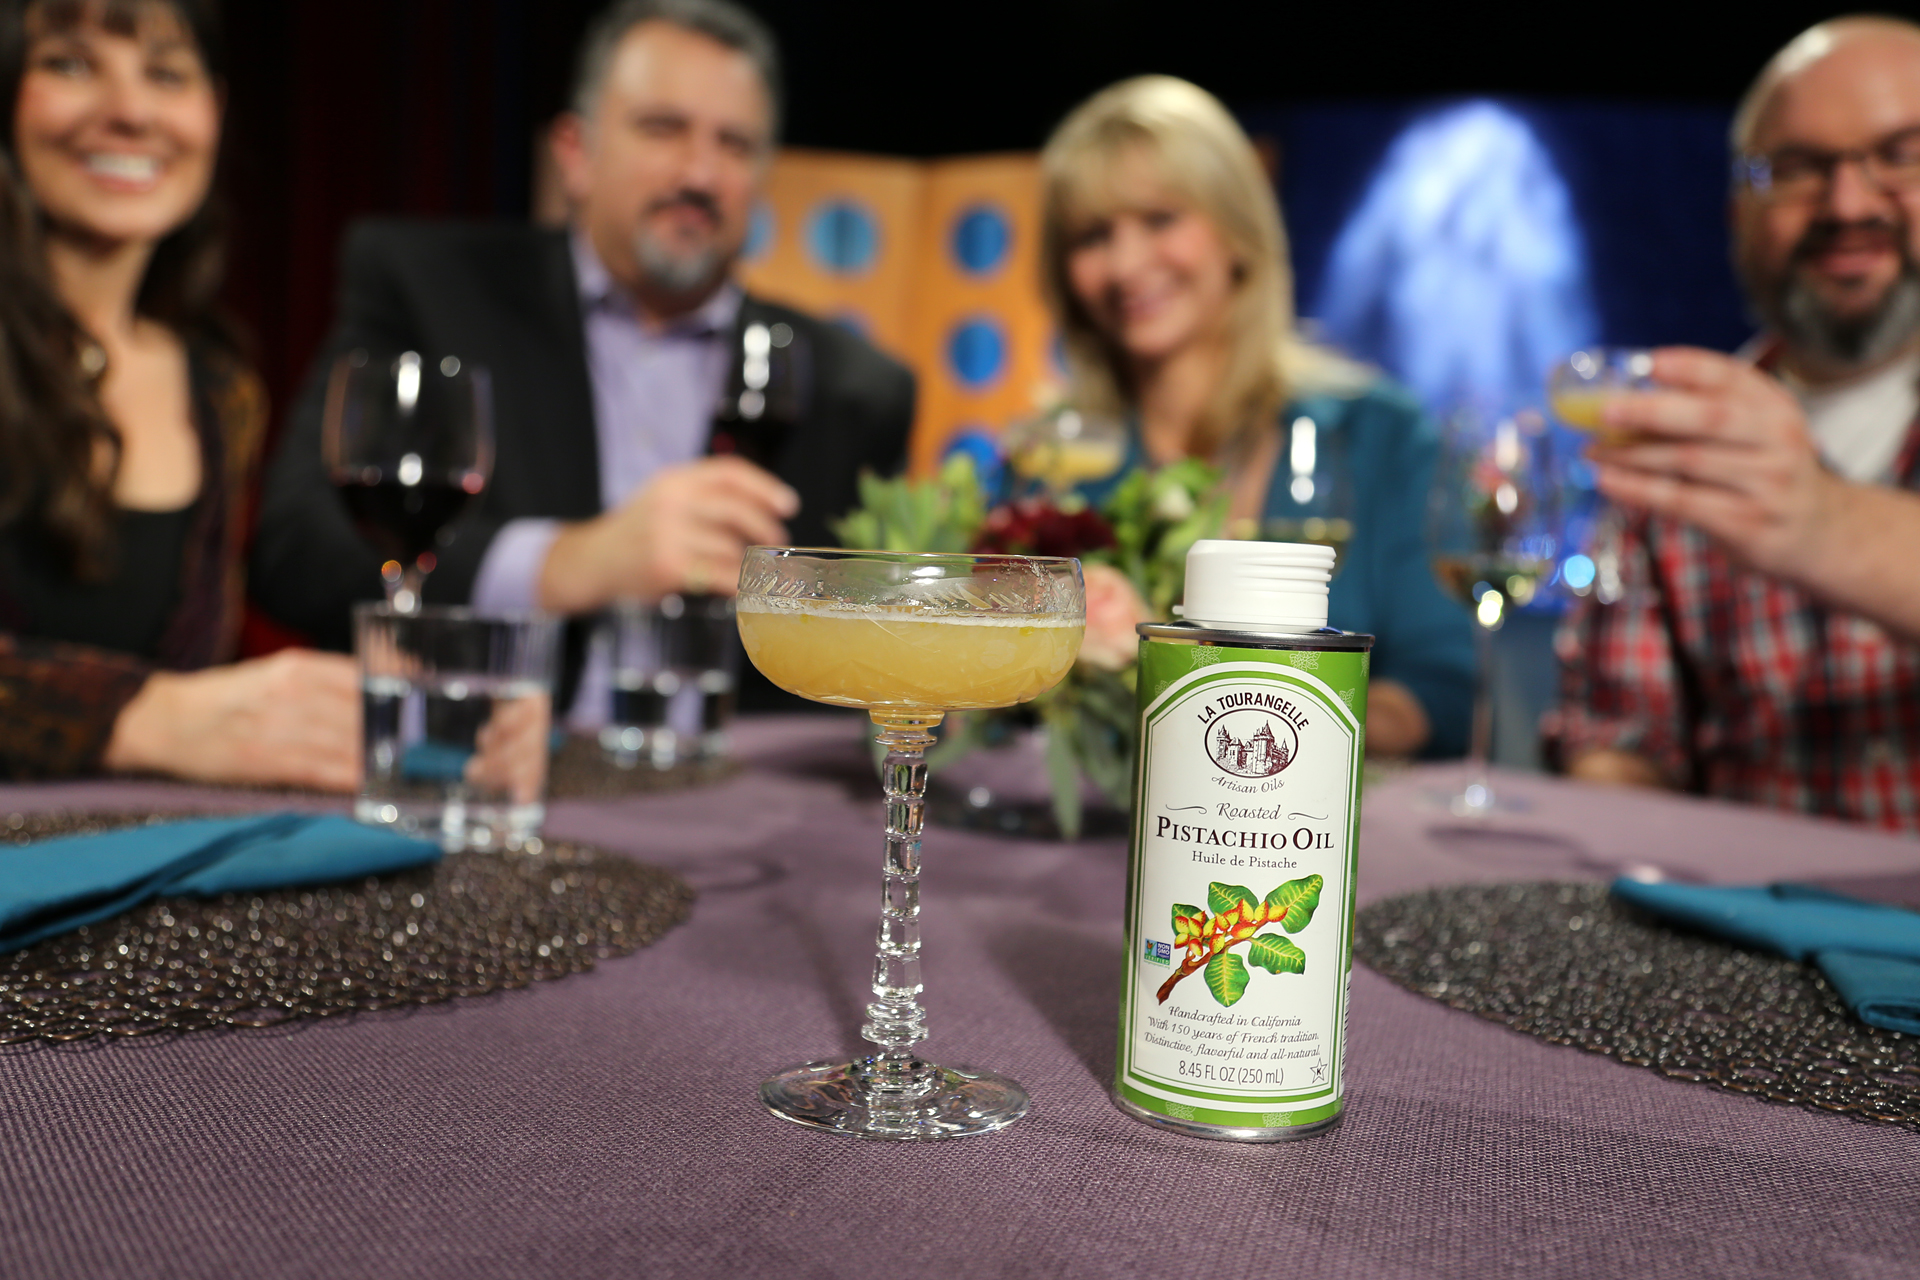 Get a taste of the Pyrenees with this delicious and flavorful cocktail recipe featuring Pistachio oil!